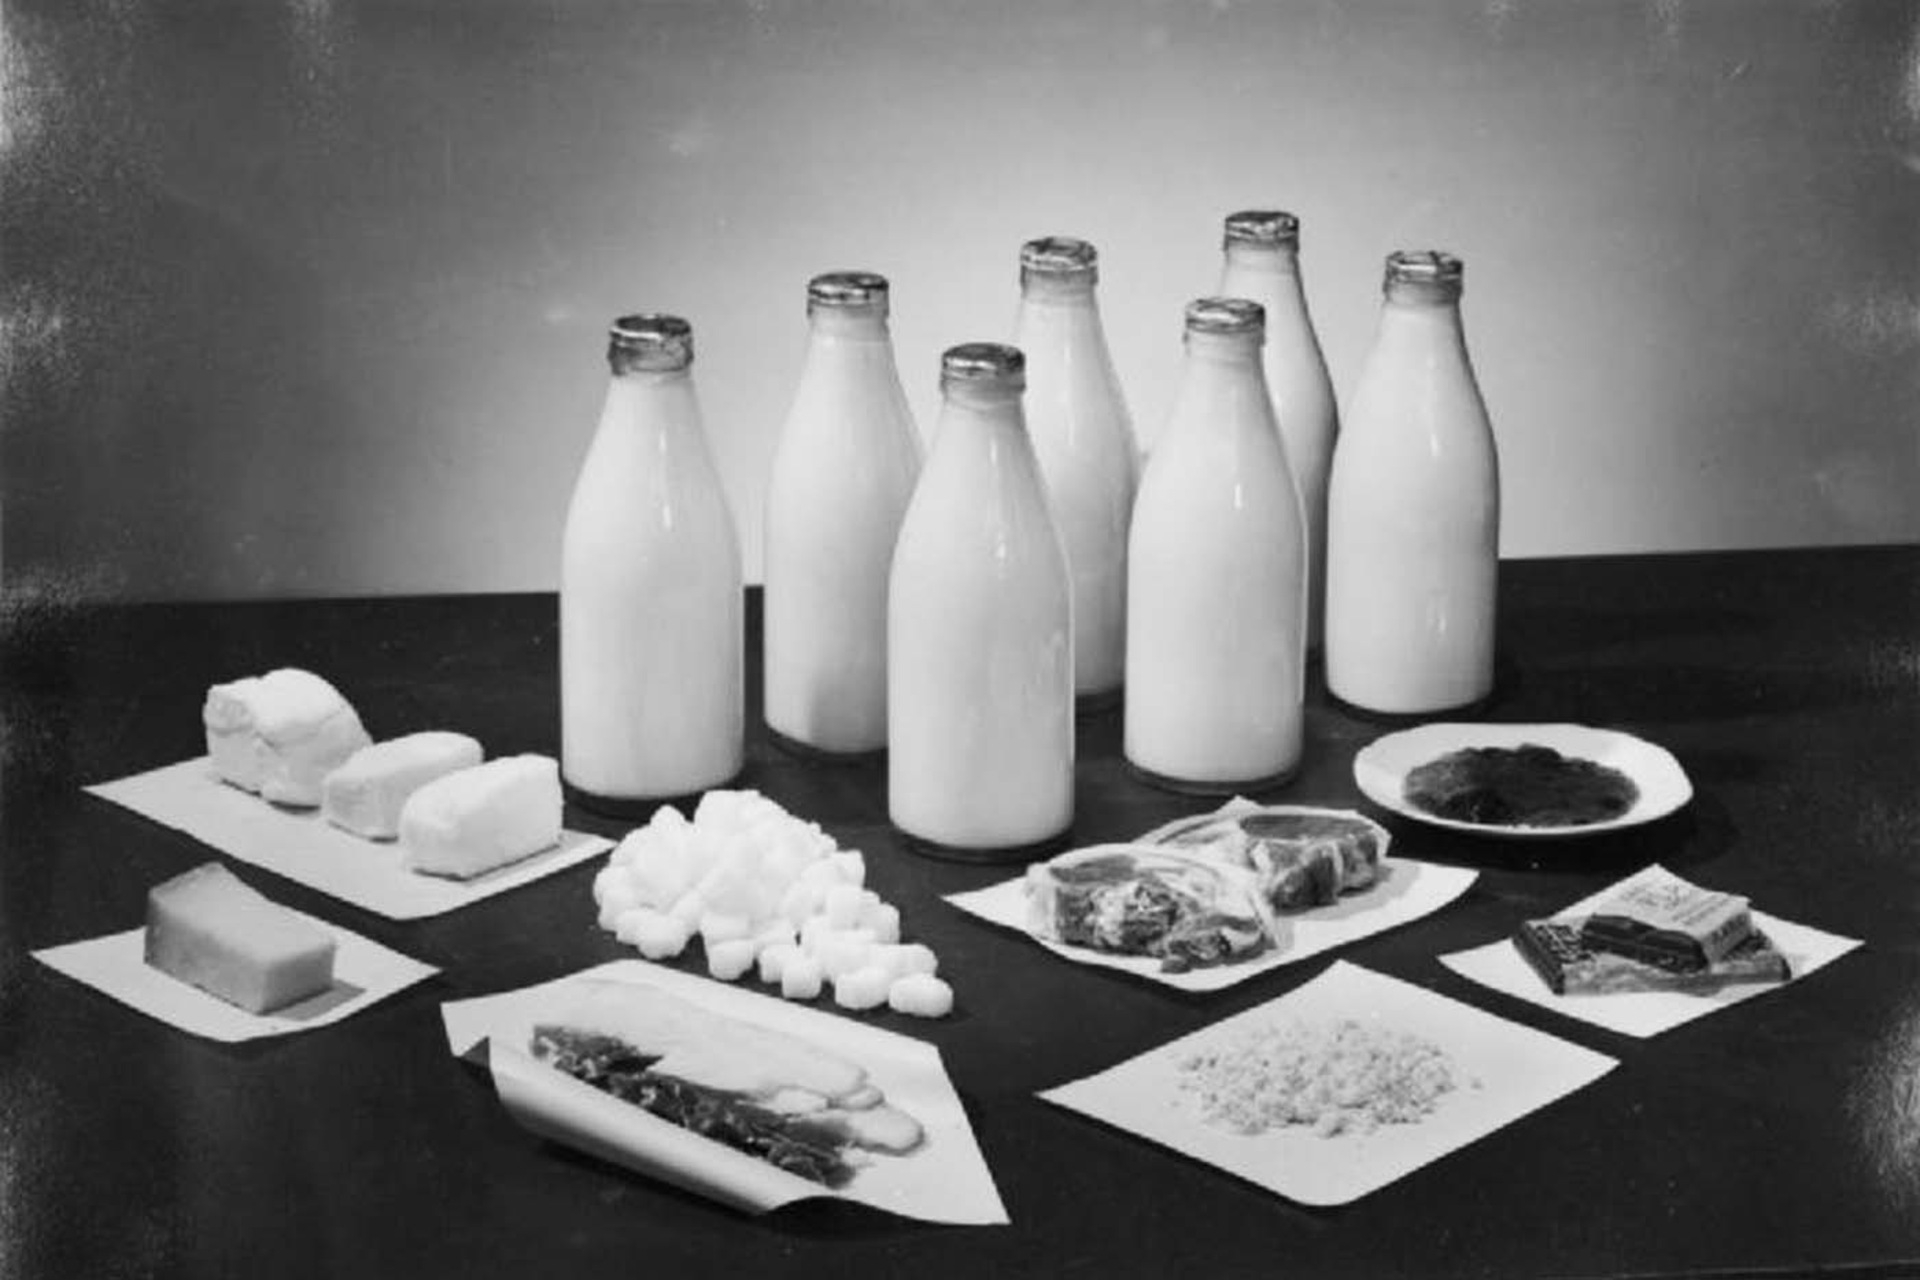 Personalized diet: the amounts of butter, milk, bacon, lard, sugar, cheese, tea and jam consumed by two people per week in Britain during World War II under rationing